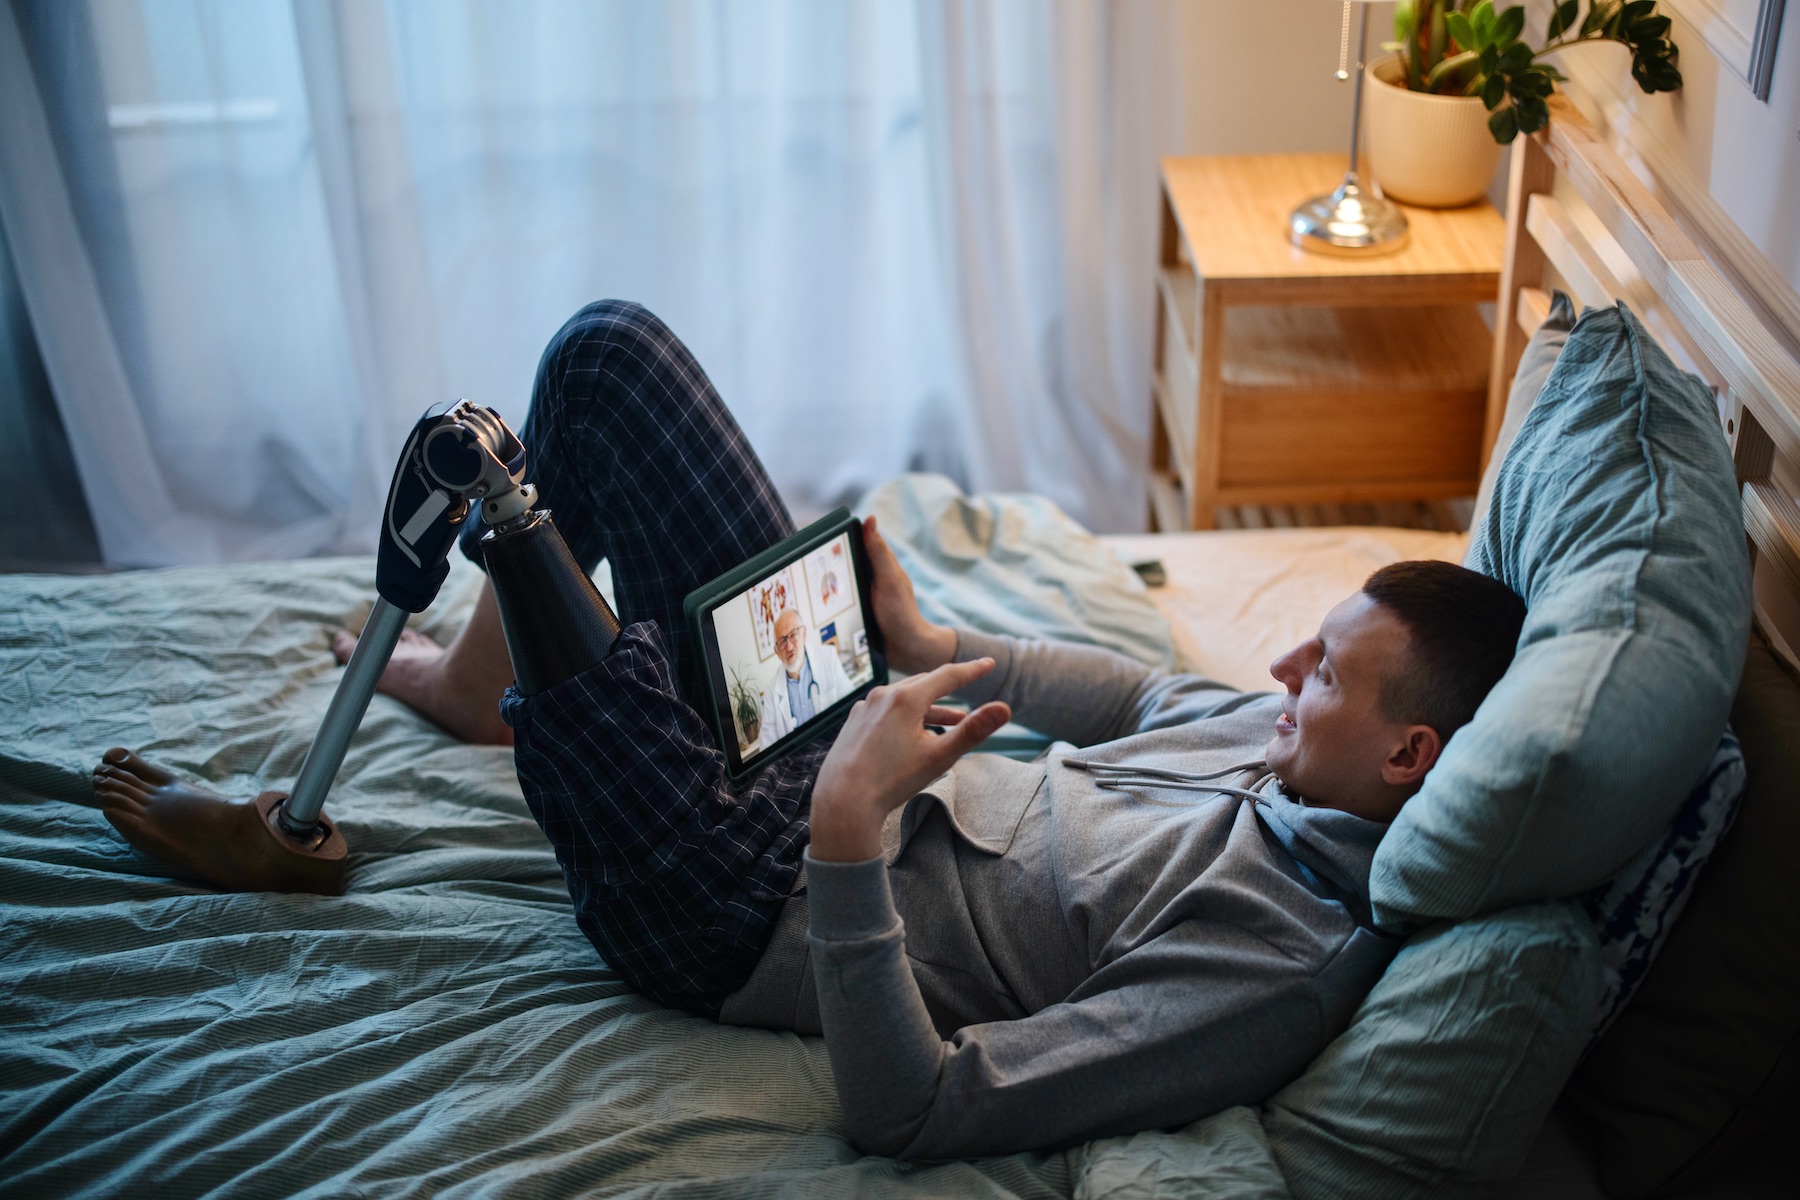 A young man leans back on a pillow in bed while chatting with his psychiatrist via video call on a tablet.